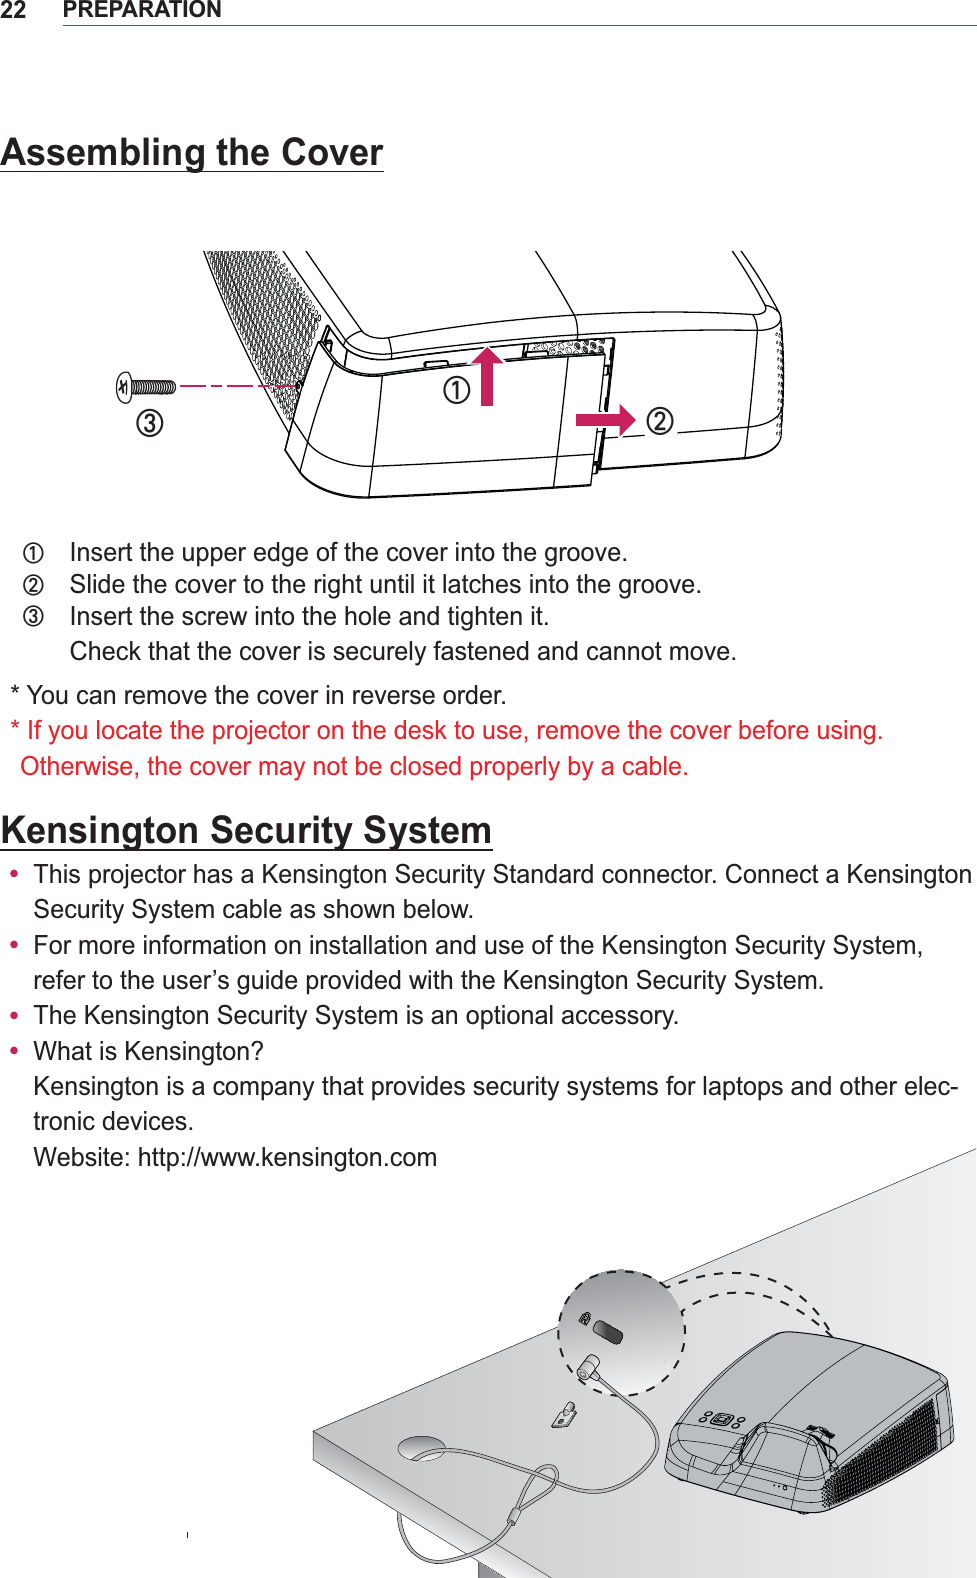 22PREPARATIONKensington Security Systemy Security System cable as shown below.y y y  -tronic devices. Website: http://www.kensington.comAssembling the Cover߃Insert the upper edge of the cover into the groove.߄Slide the cover to the right until it latches into the groove.߅Insert the screw into the hole and tighten it.Check that the cover is securely fastened and cannot move.* You can remove the cover in reverse order.*  If you locate the projector on the desk to use, remove the cover before using.  Otherwise, the cover may not be closed properly by a cable.߃߄߅